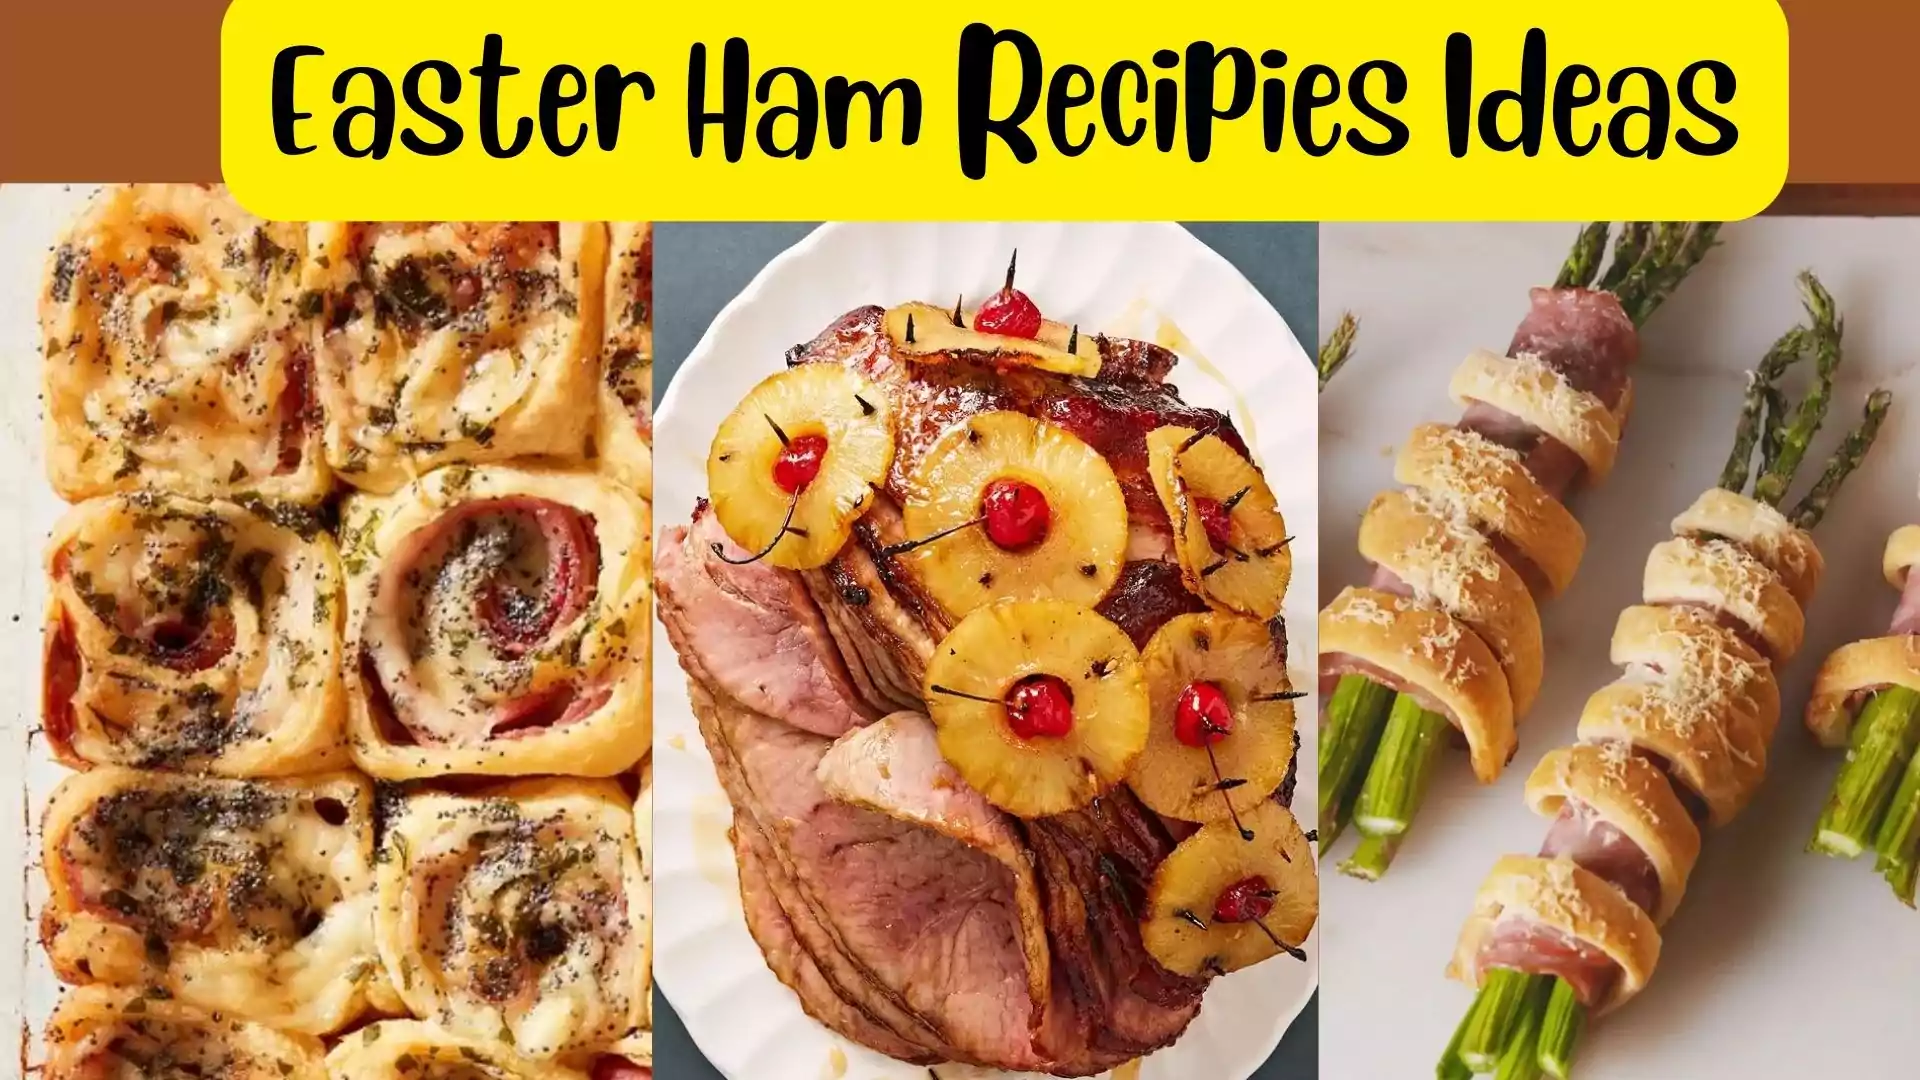 Easter Ham Recipies wallpaper and images | Easter 2022